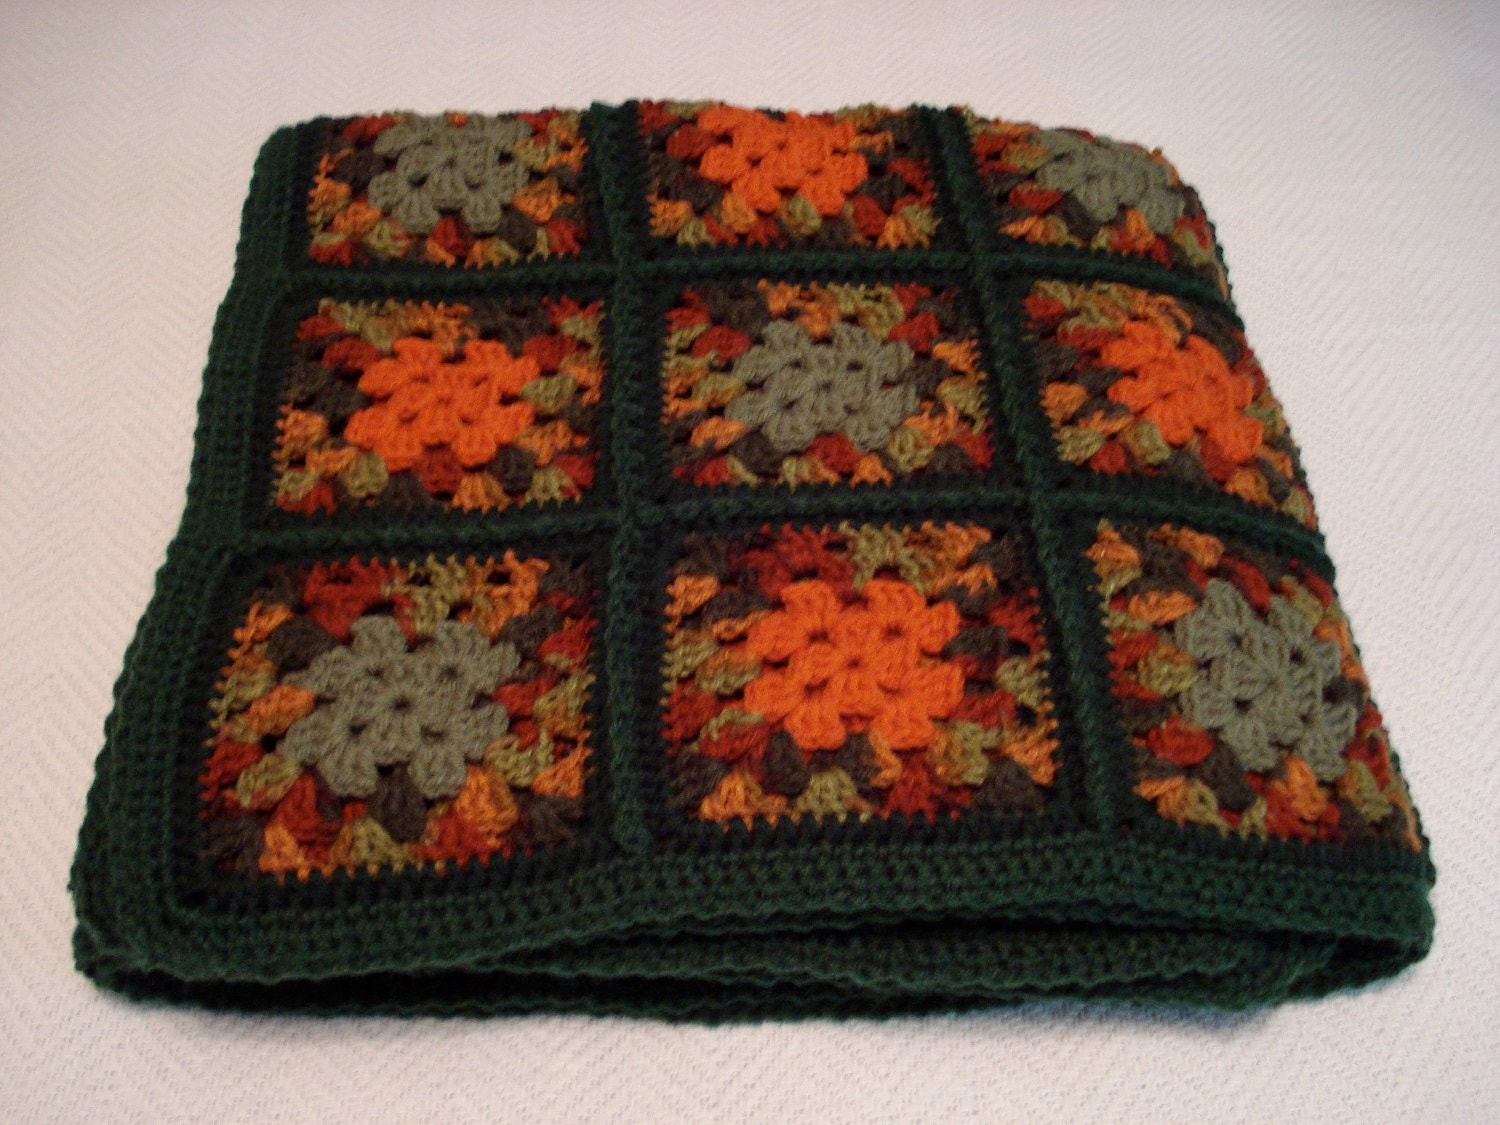 Fall Festival Autumn Colors Crochet Granny Square Afghan in